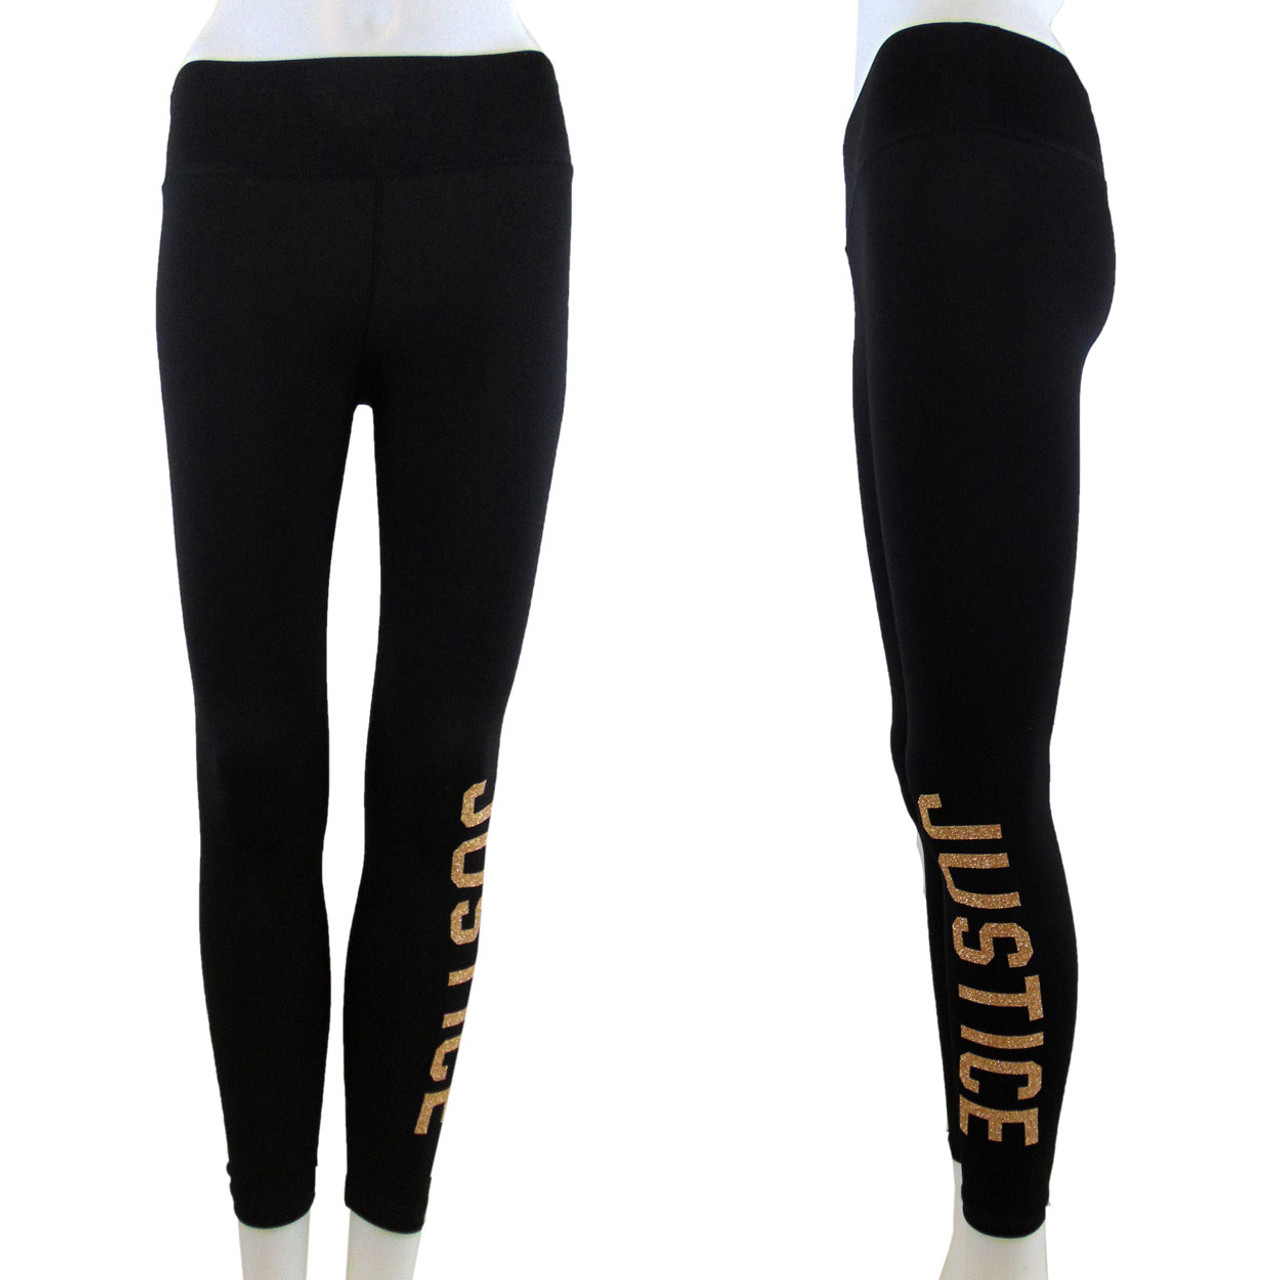 Justice - Girls Black Leggings  One Stop Thrift Shop Discount